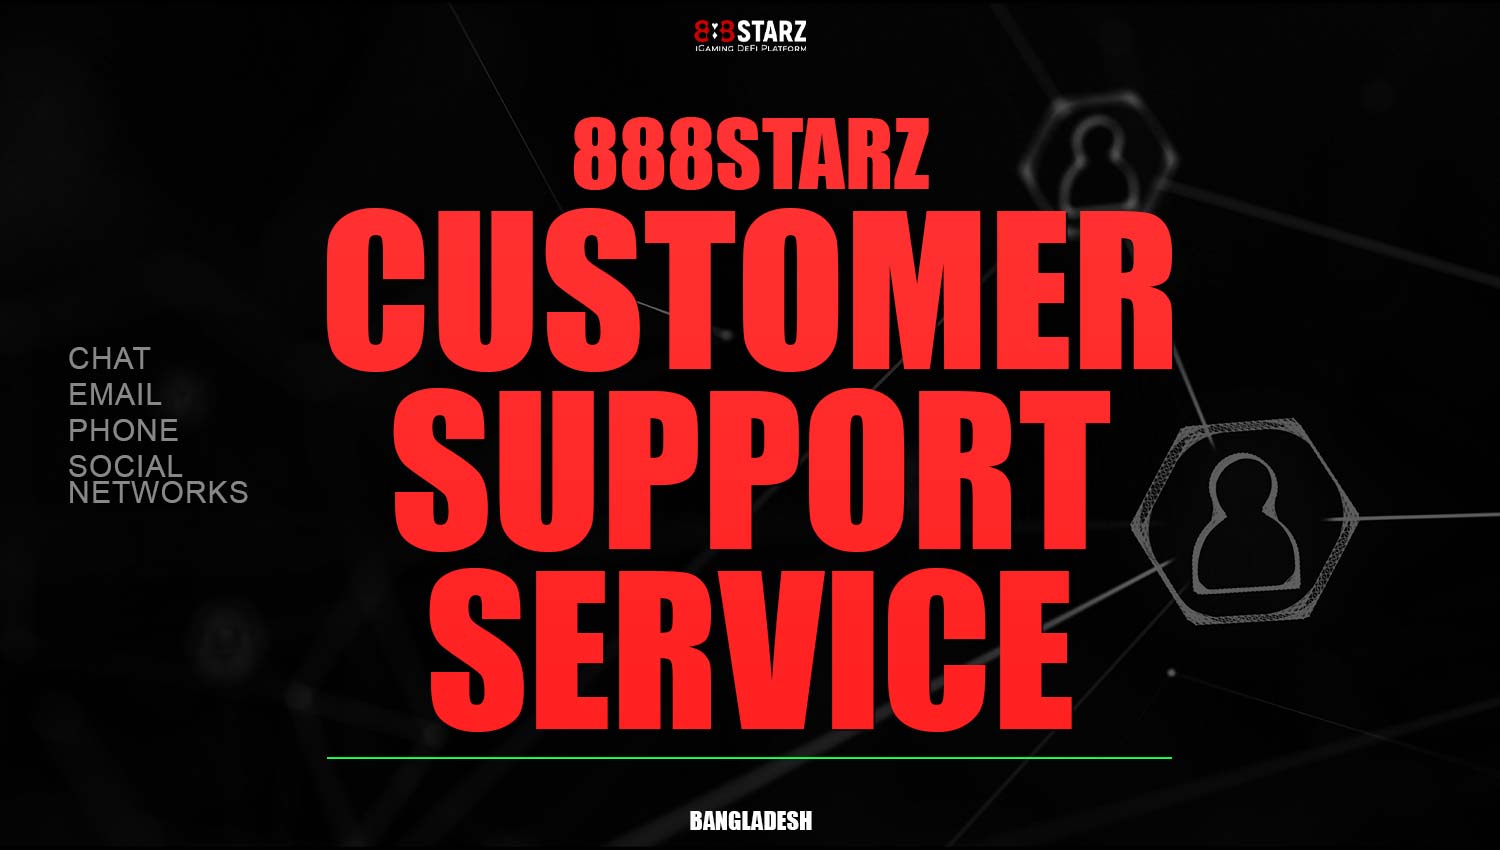 Ways to contact 888Starz customer support.